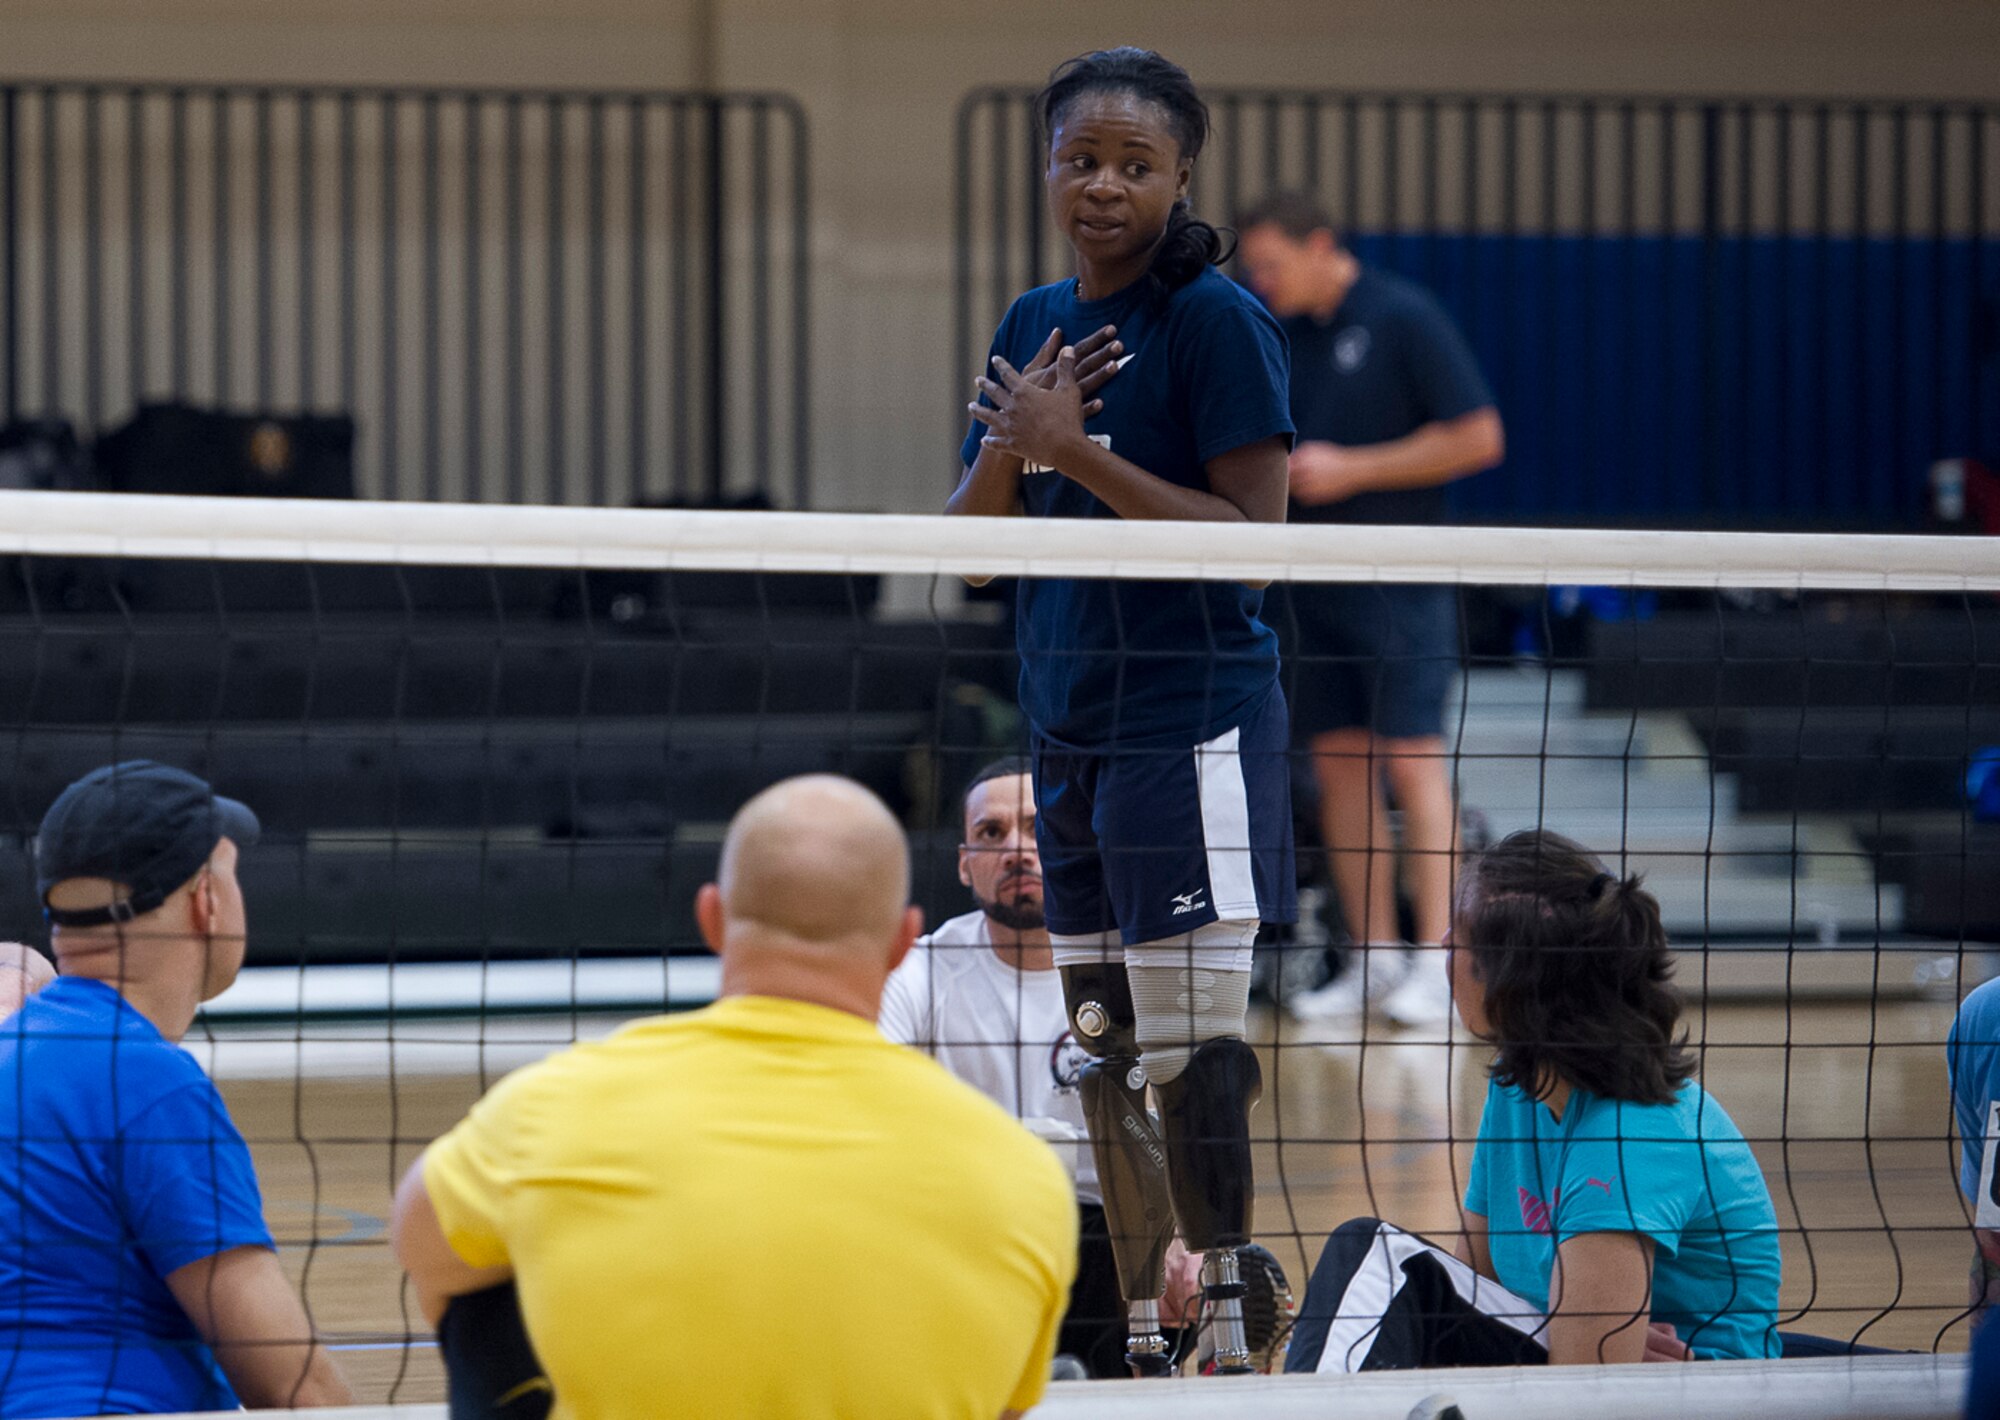 *Teaching the fundamentals of sitting volleyball at the Rambler Fitness Center, Randolph Air Force Base, Texas, Jan. 18, Miller embraces the opportunity to meet, coach and mentor wounded, injured and ill warriors participating in a Paralympic military sports camp. Even though she was in the Army, Miller has a soft spot for the Air Force as her younger brother, Michael Miller, served as an F-16 crew chief at Cannon AFB, N.M. (Photo by Tech. Sgt. Samuel Bendet)